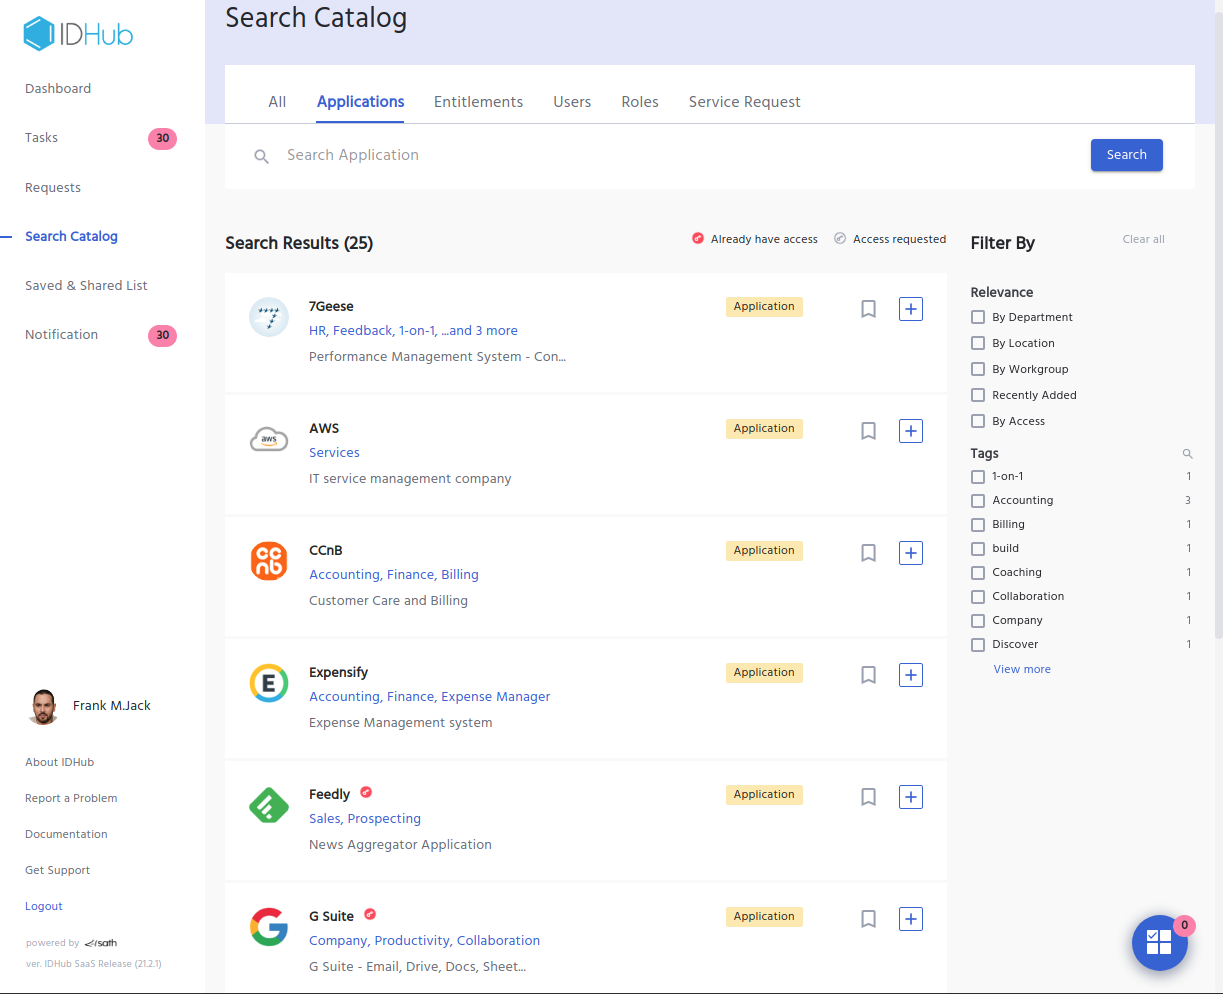 Search Catalog Page. Search for all active organizational resources.